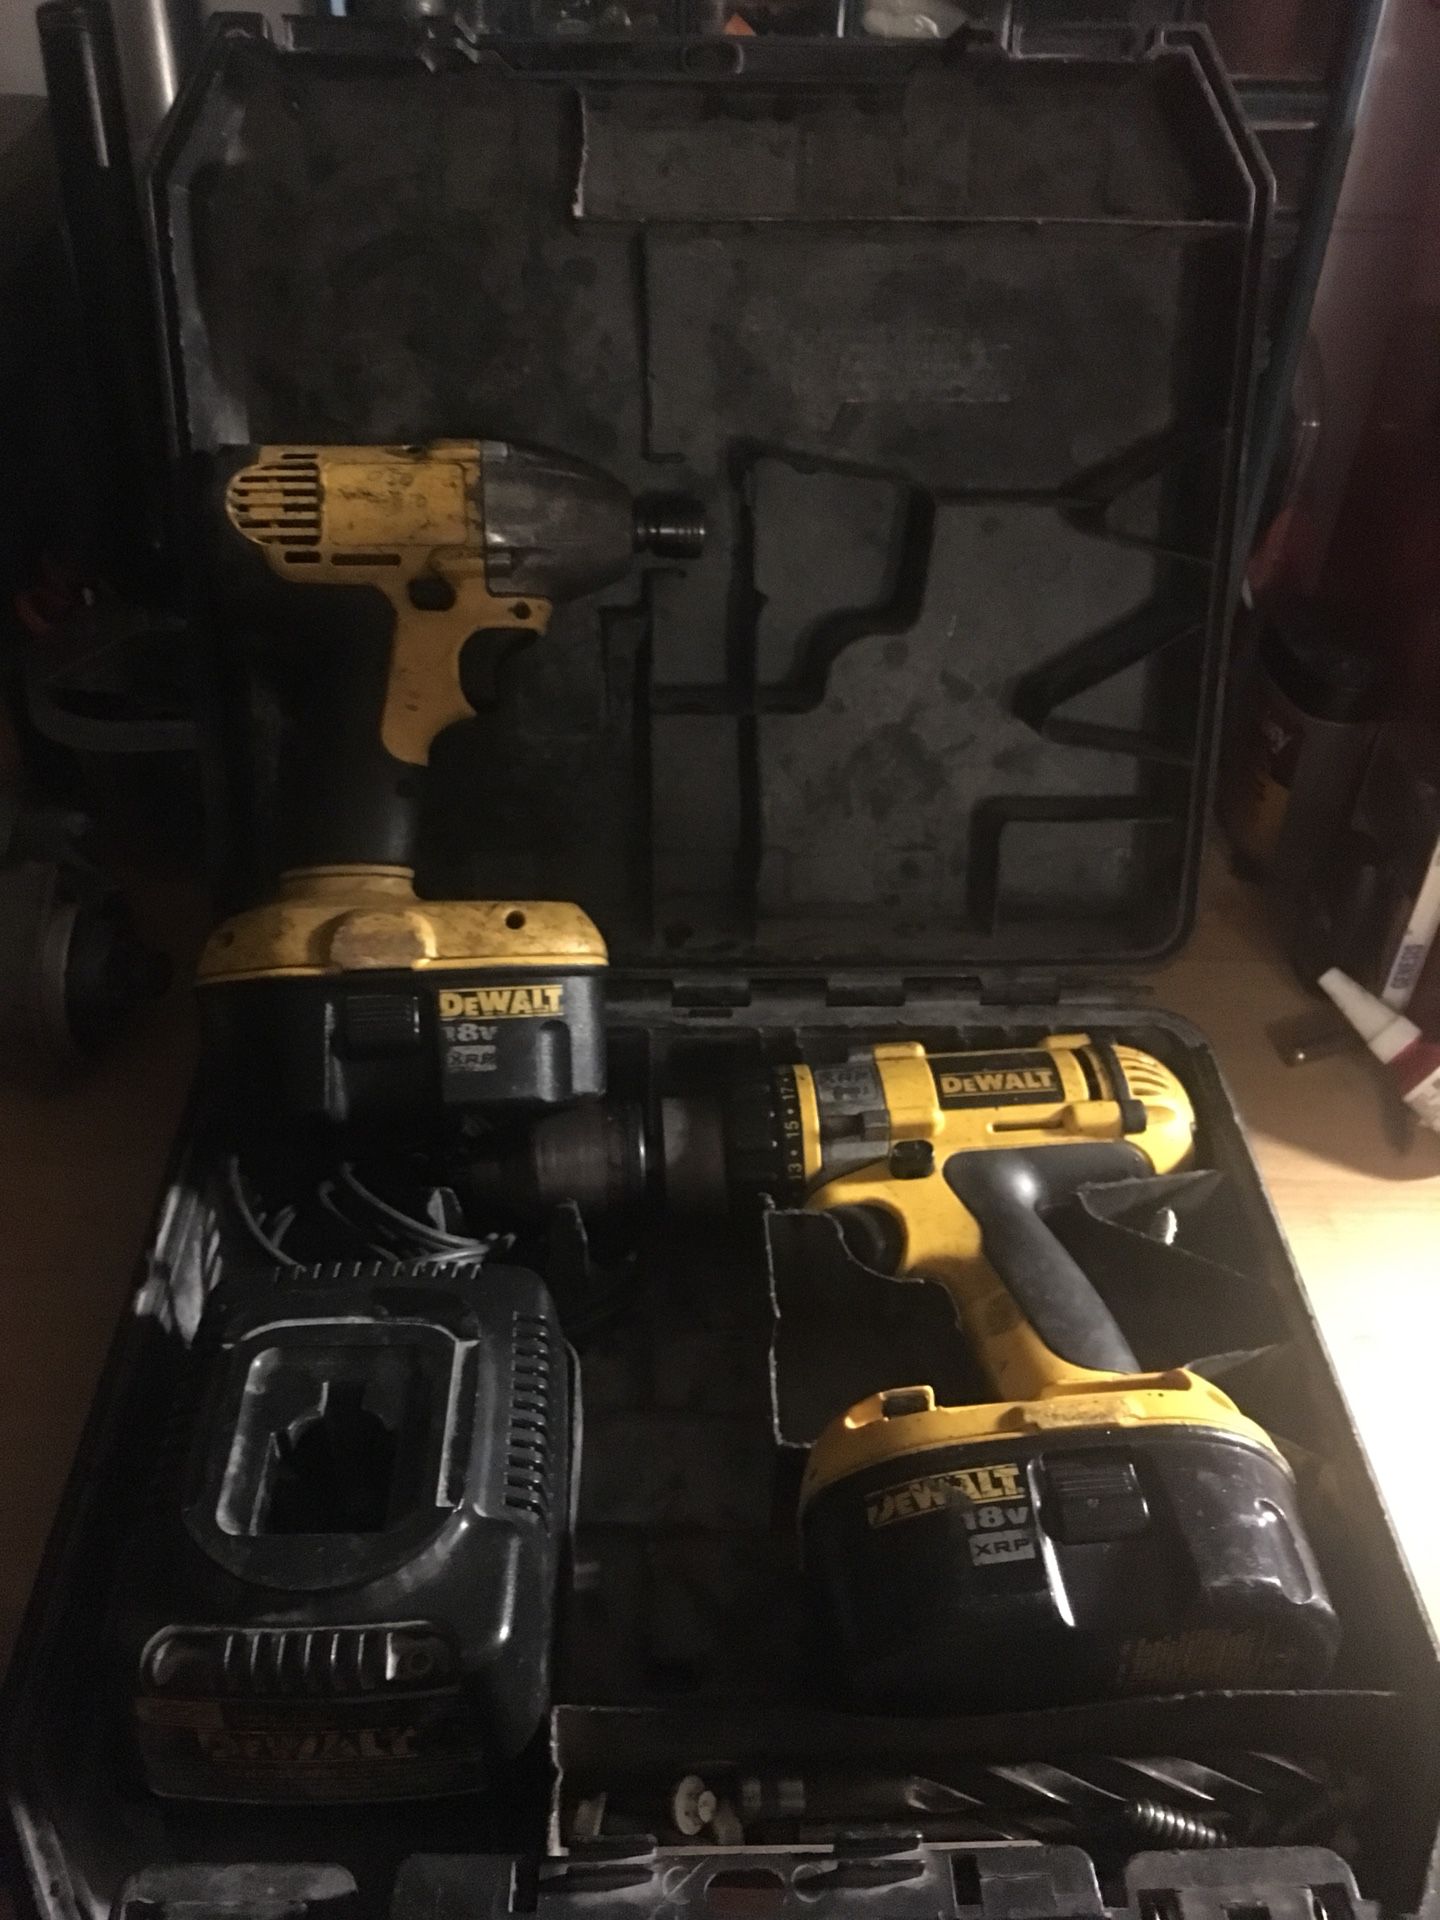 18 volt dewalt drill & impact set with 2 batteries and case ( trade for nice wheelbarrow)